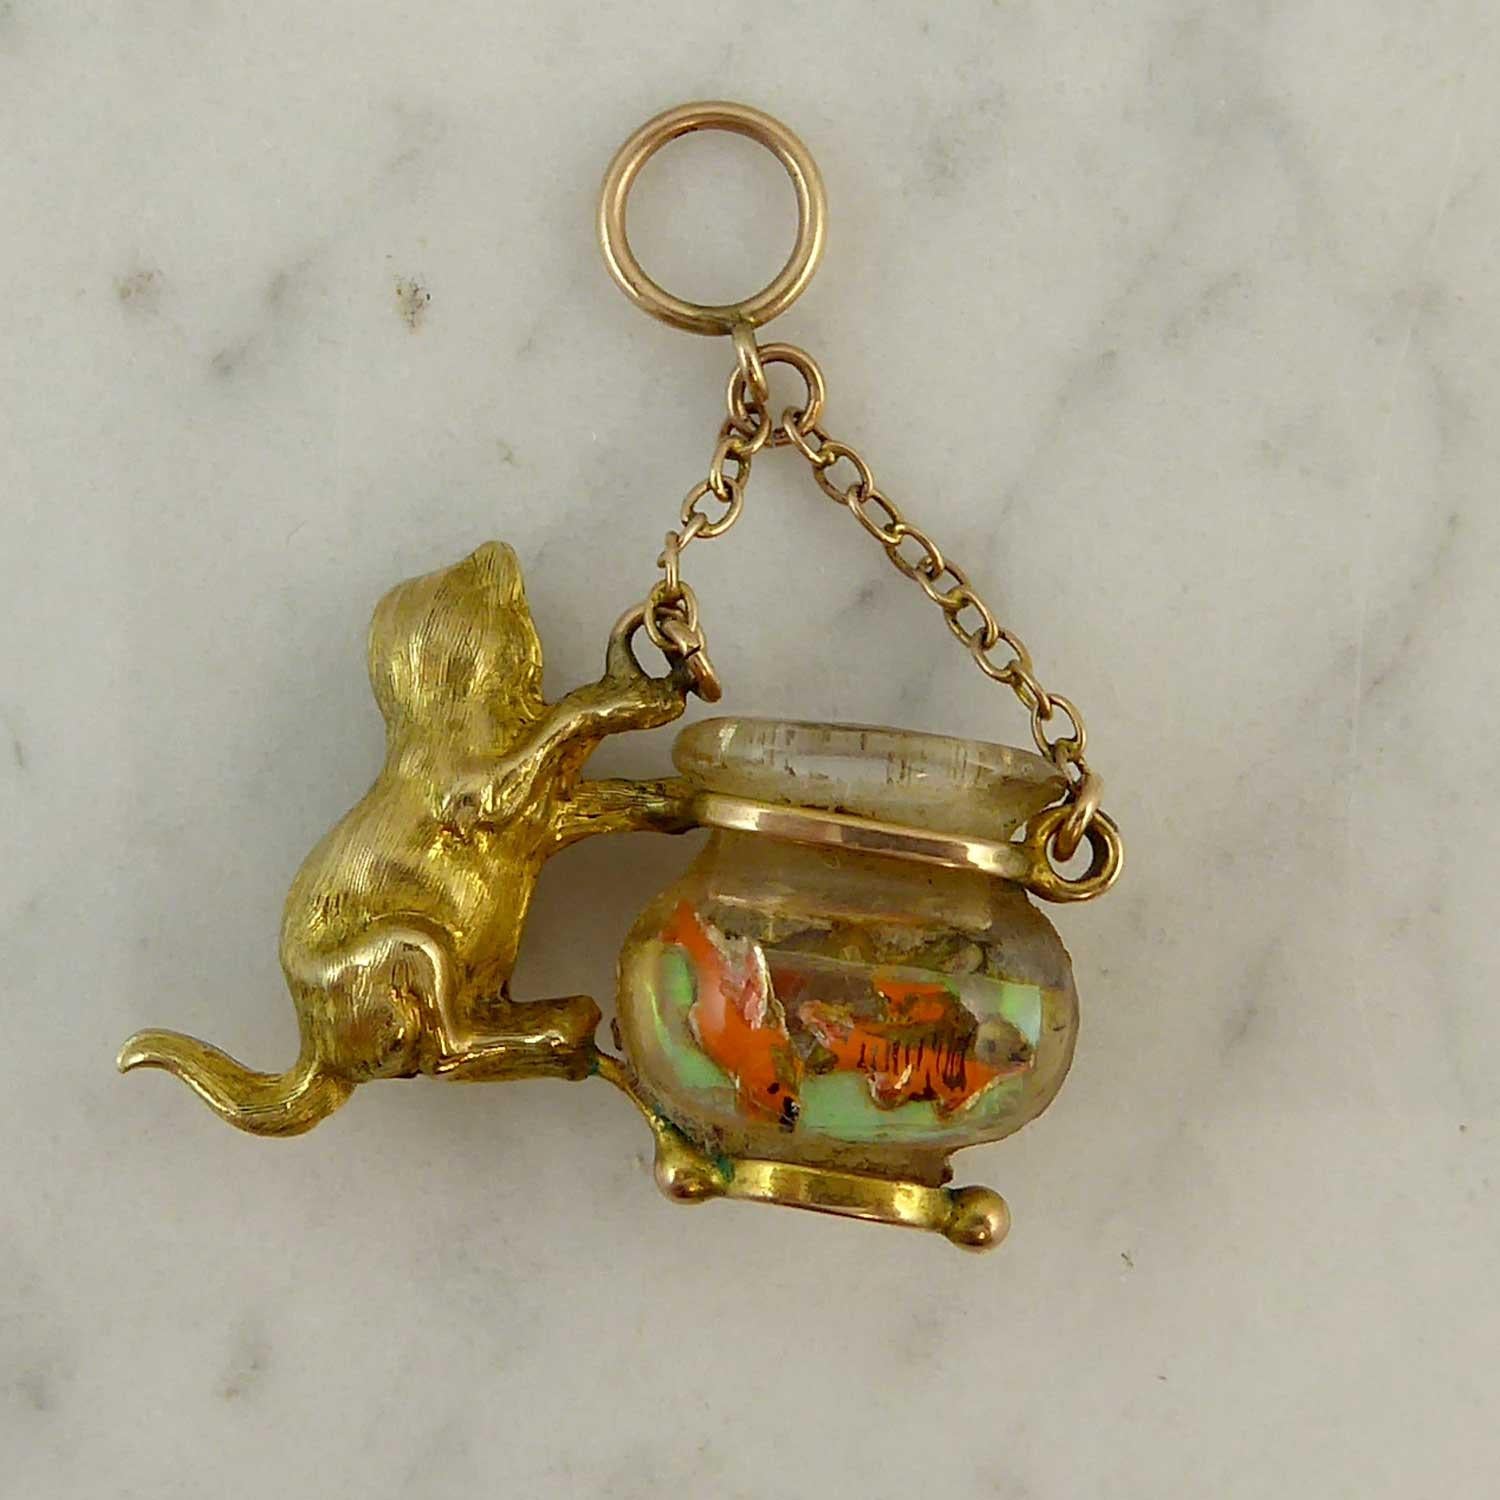 An unsual charm dating from the mid-20th century showing a naughty, green-eyed cat climbing up the side of a large bowl in which there are two unsuspecting goldfish. The charm suspends from two strands of gold trace chain leading to a pendant loop.